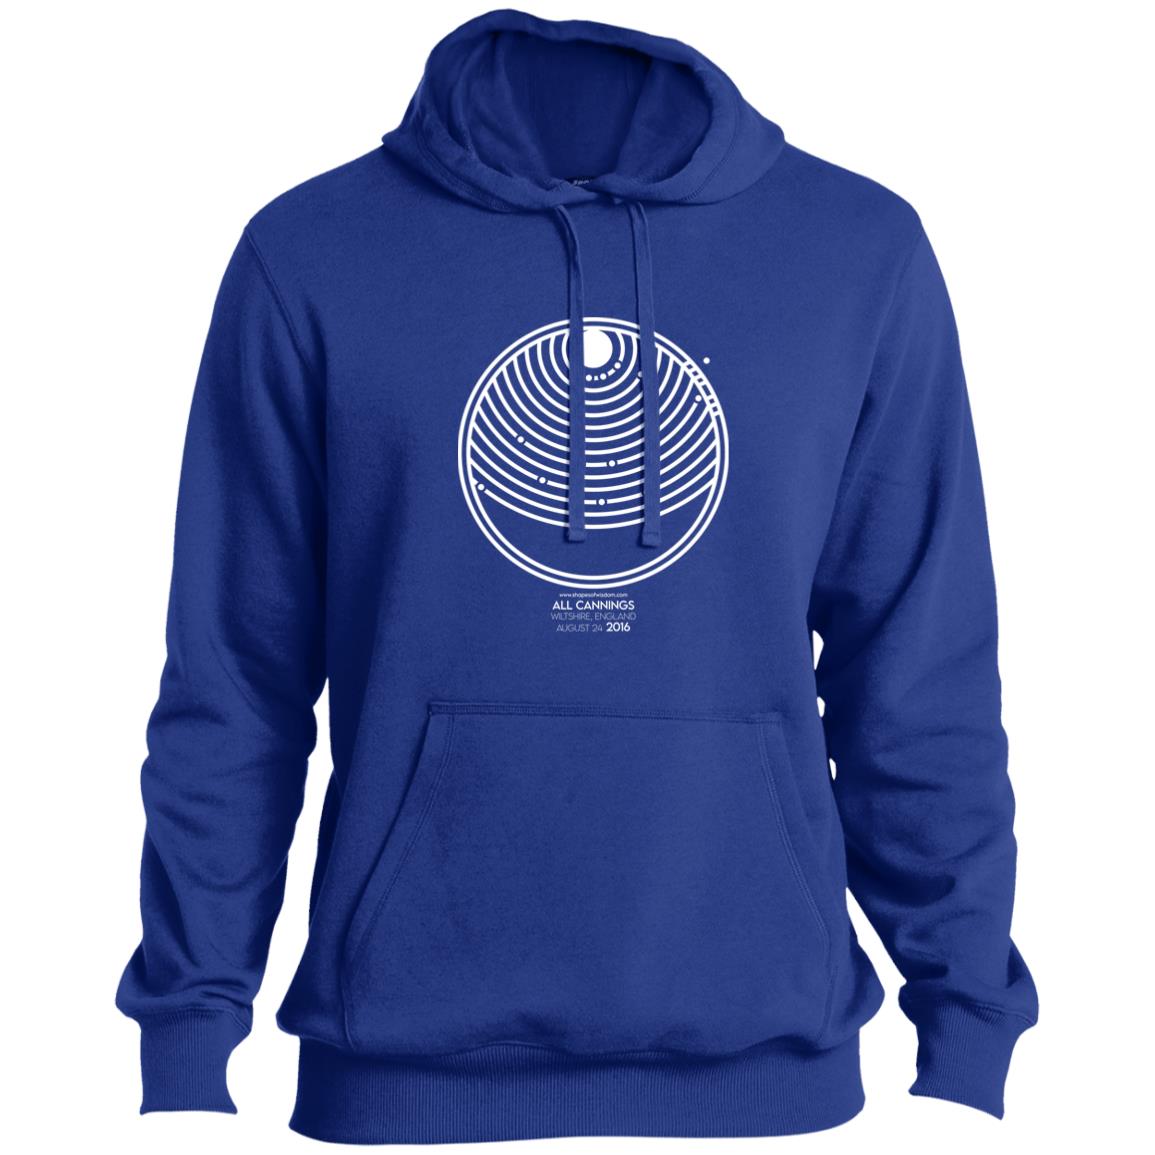 Crop Circle Pullover Hoodie - All Cannings 5